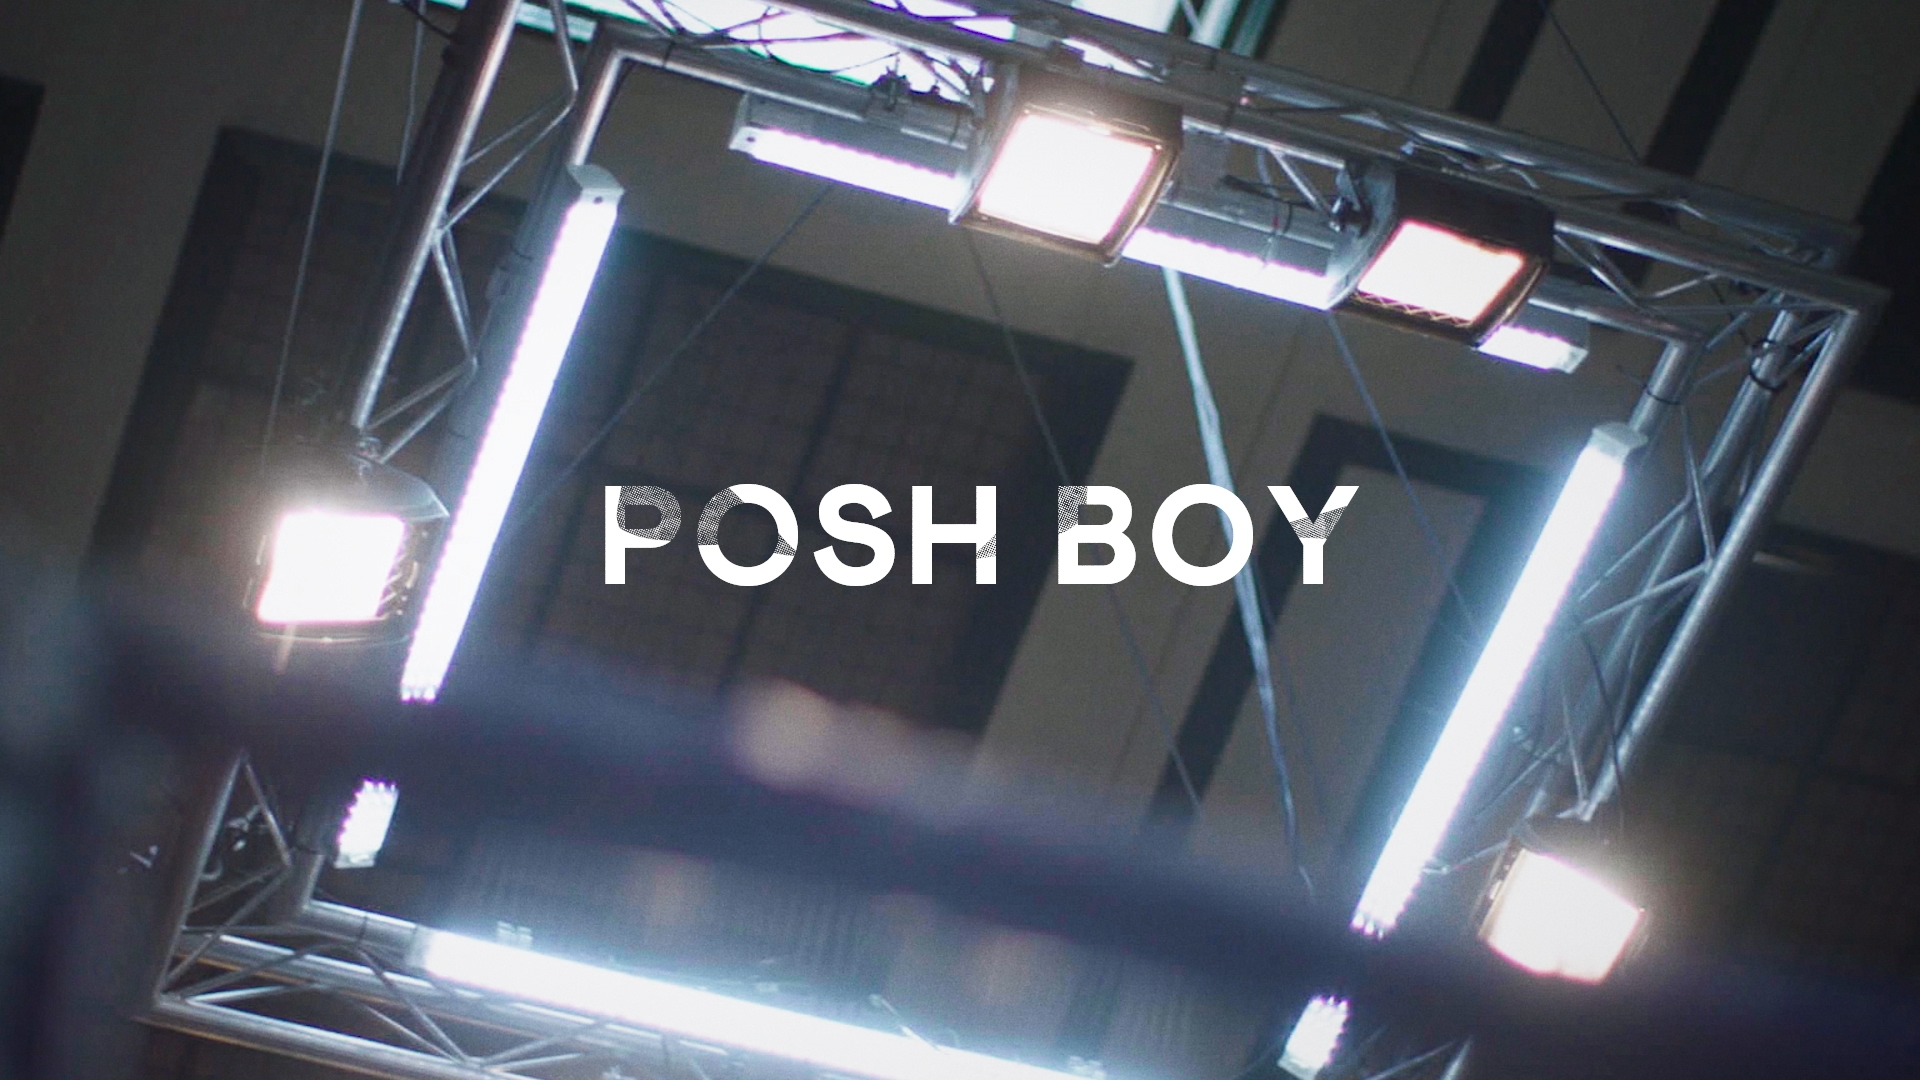 Minute-By-Minute Boxing in 'Posh Boy' Documentary